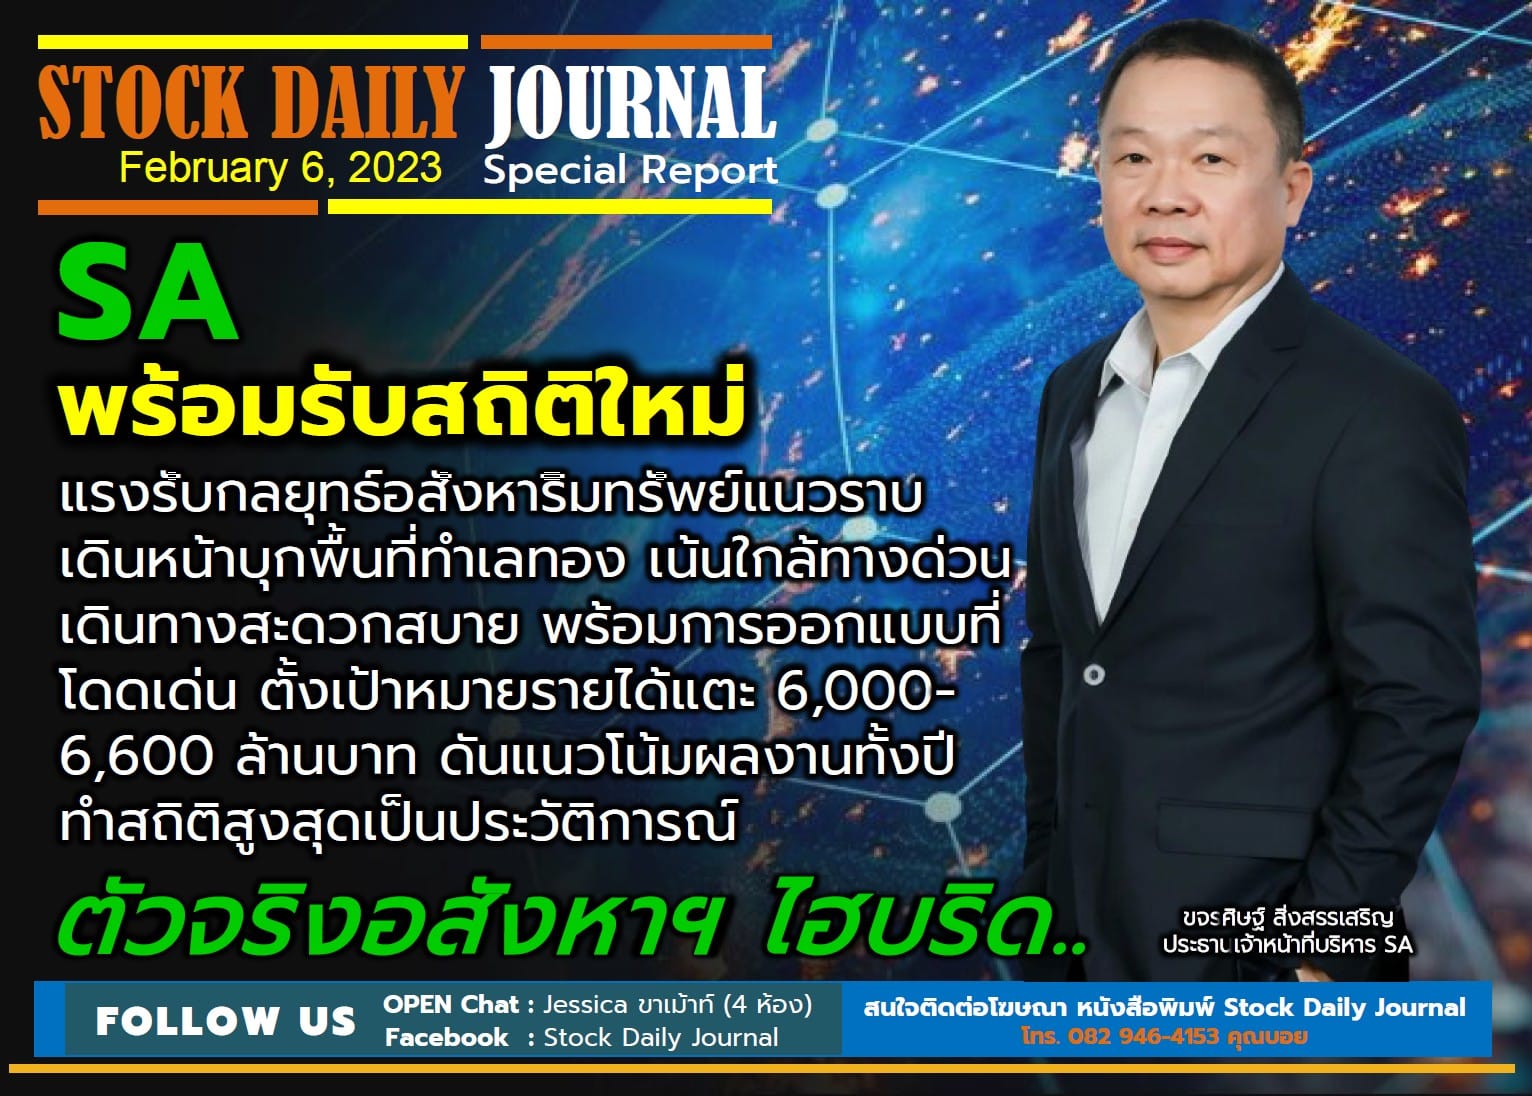 STOCK DAILY JOURNAL “Special Report : SA”